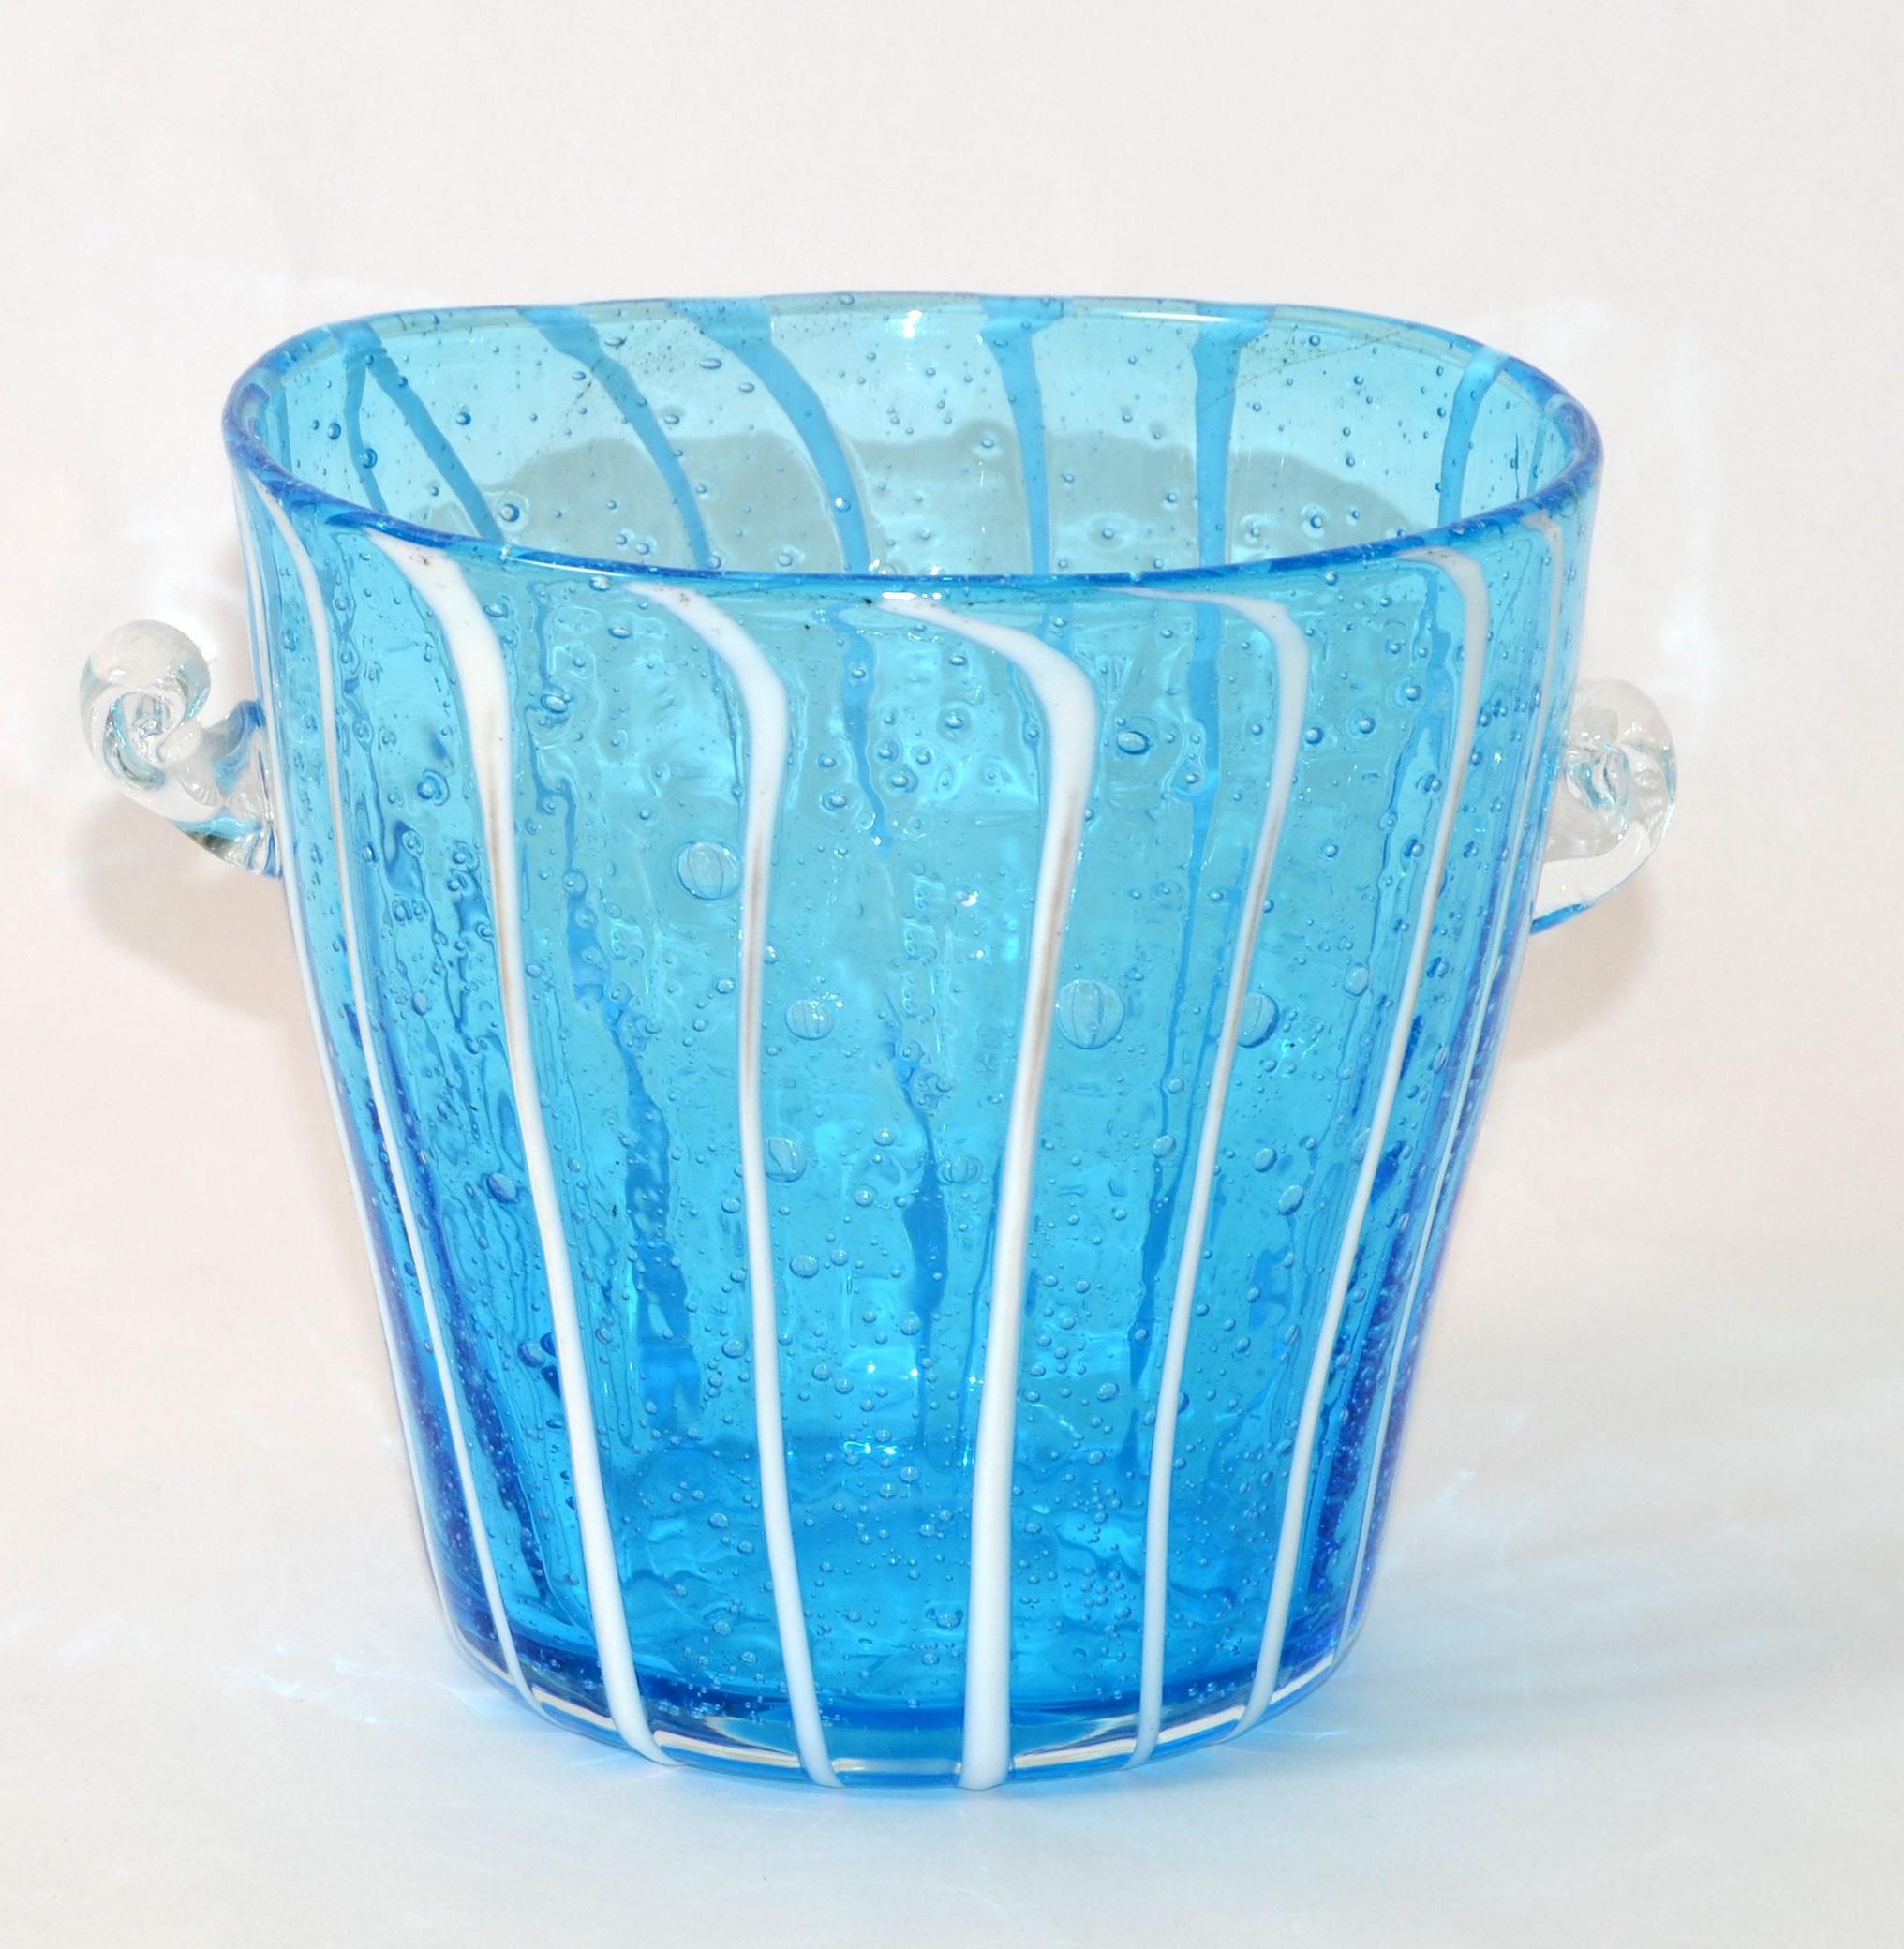 Vintage Venini Murano martini ice cube container in light blue, white & transparent wine cooler, ice bucket made in Italy 1970.
No Makers Logo, Venini For DISARONNO, but it is an original.
Measures from handle to handle: 6.5 inches, Diameter Top